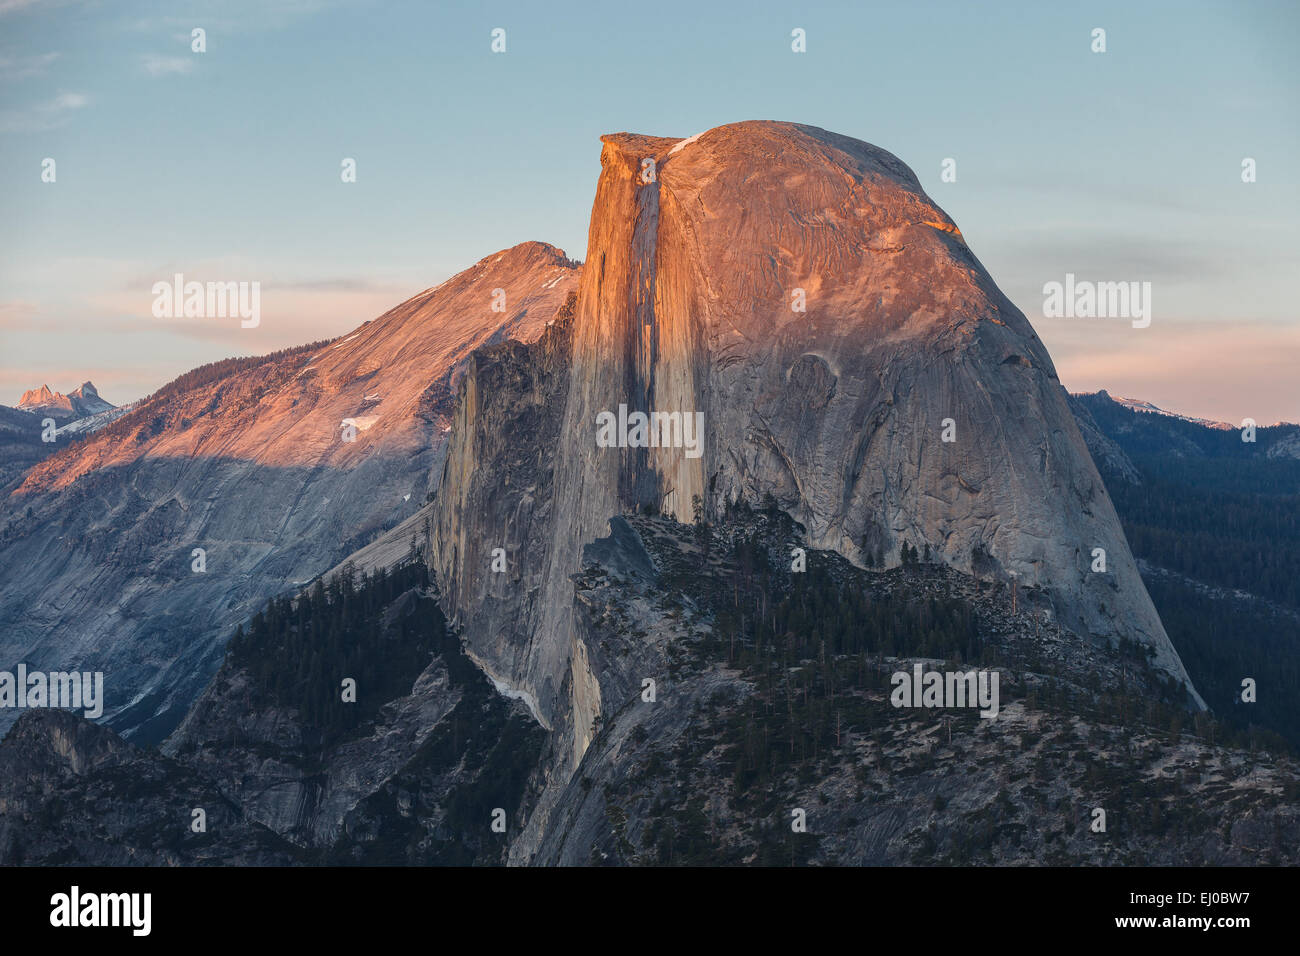 Half Dome by sunset from Glacier Point, Yosemite National Park, California, United States of America. Stock Photo